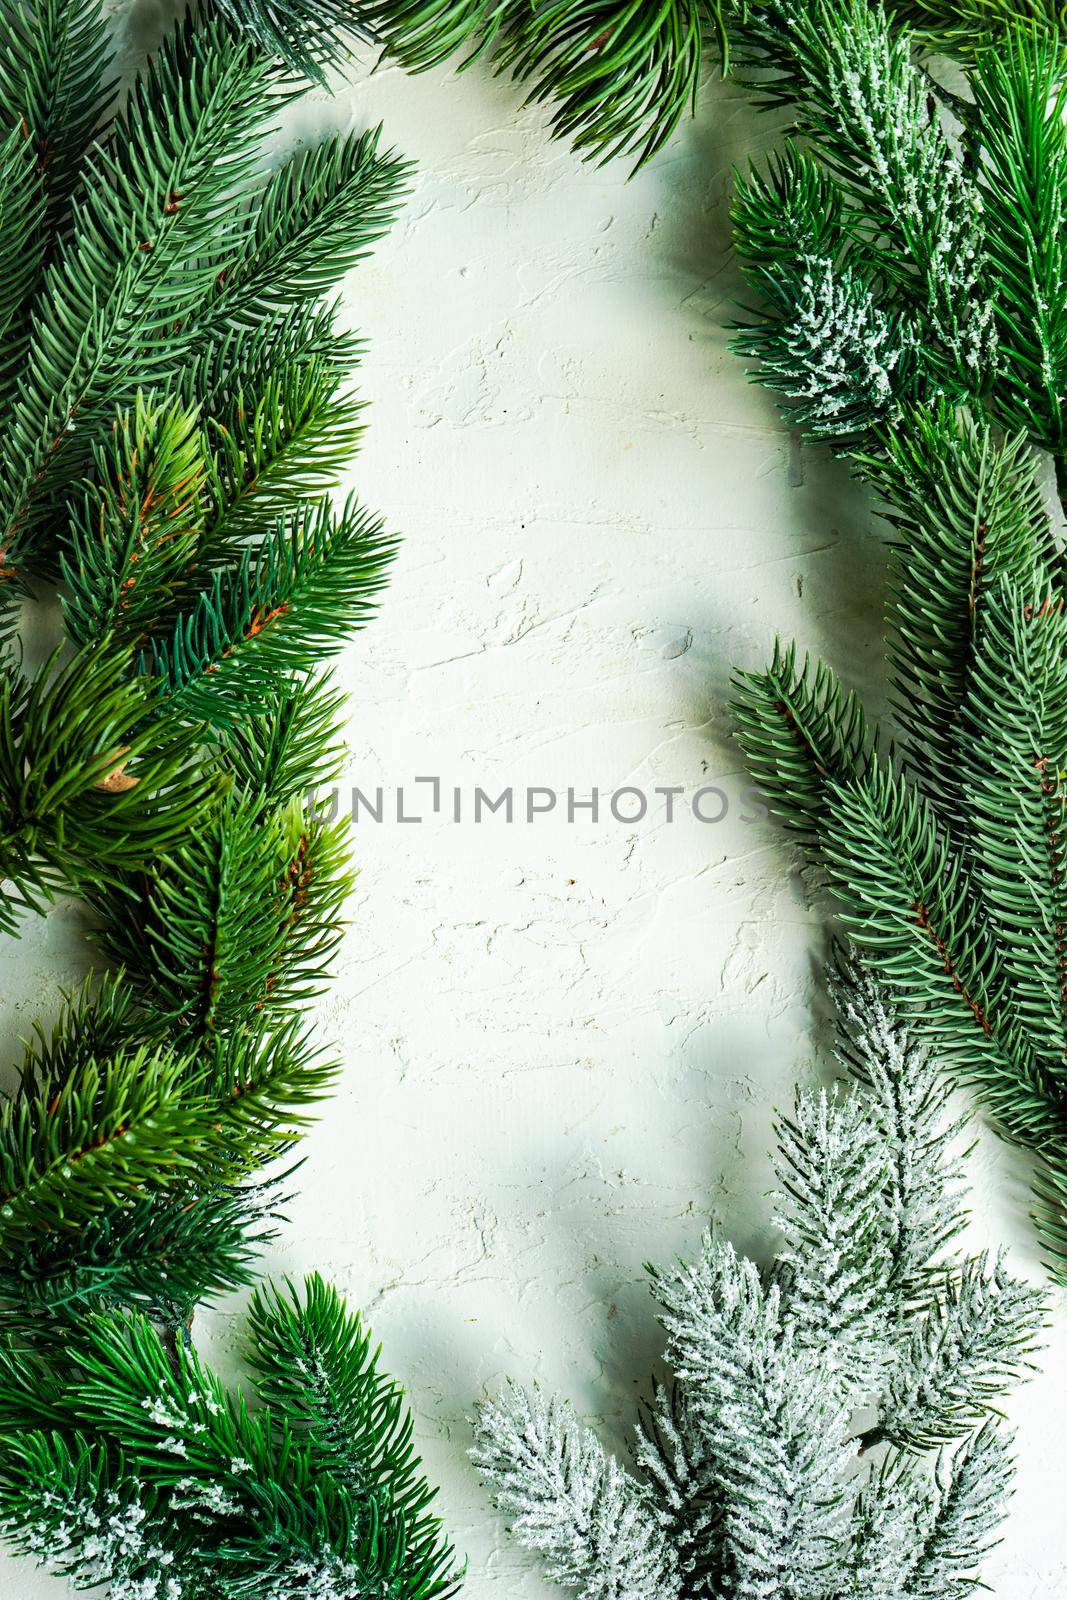 Minimalistic Christmas card concept on concrete background with copy space